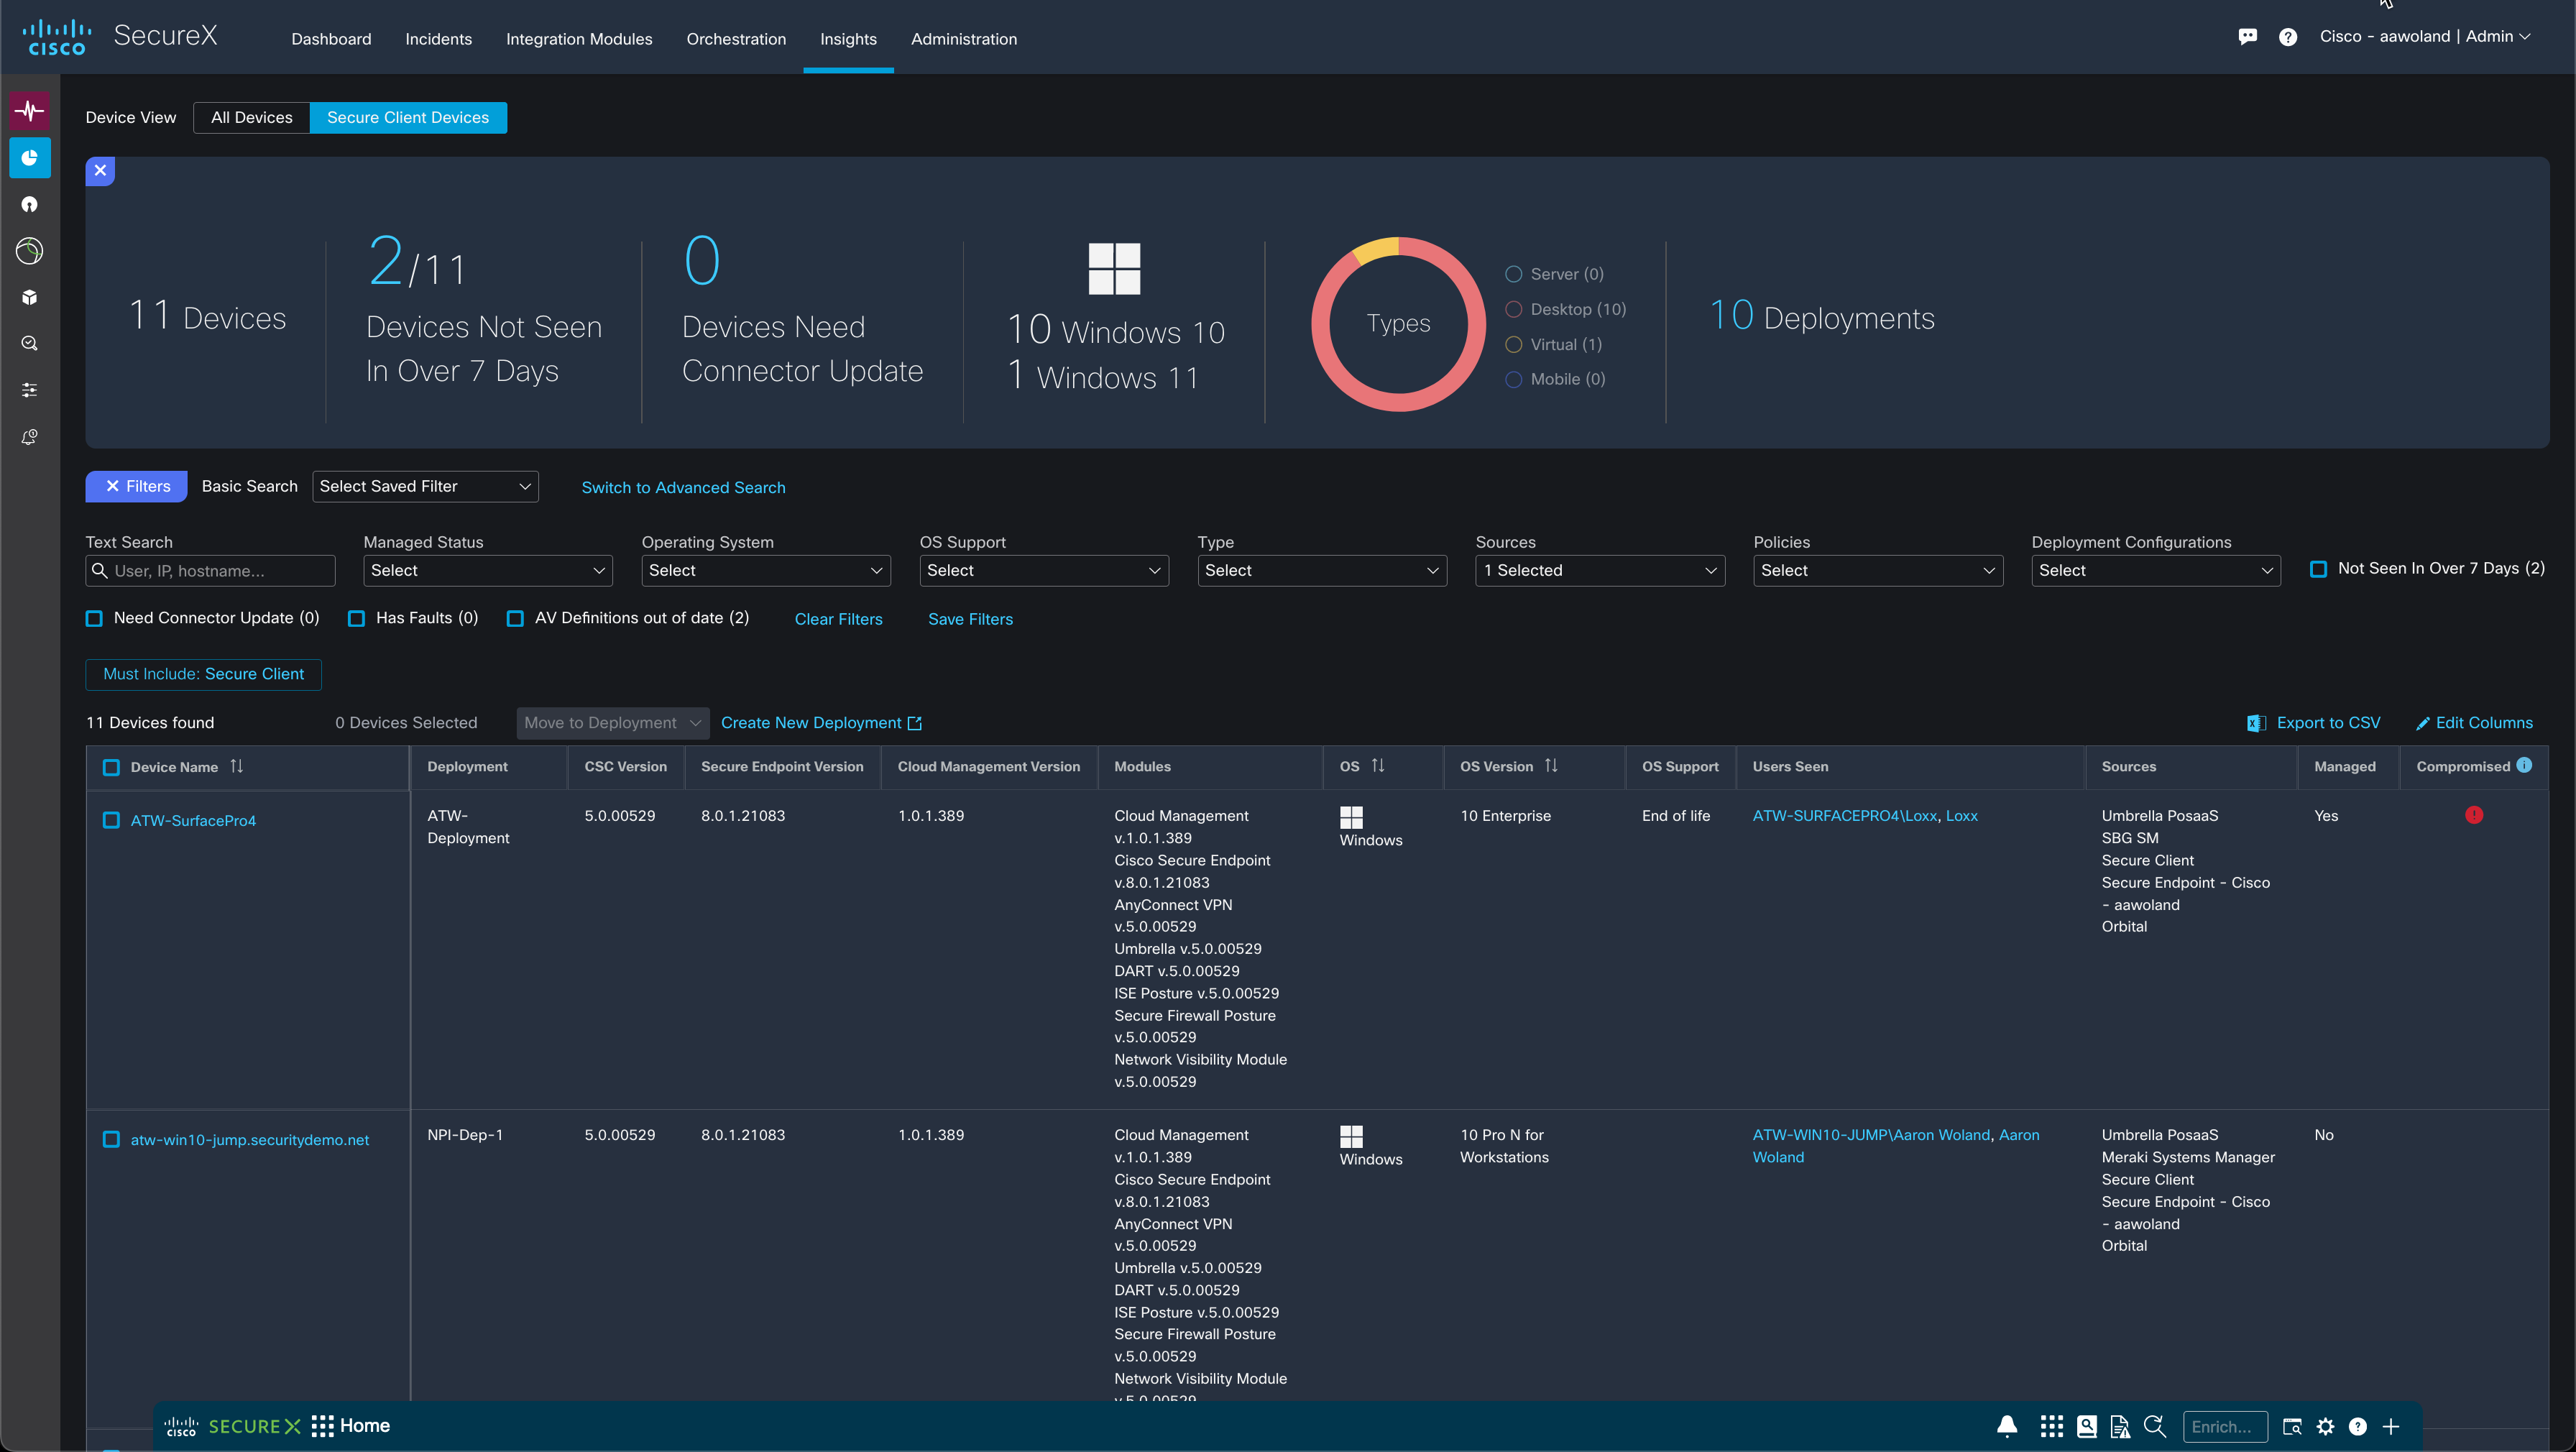 View of the SecureX Device Insights UI with new Secure Client features.